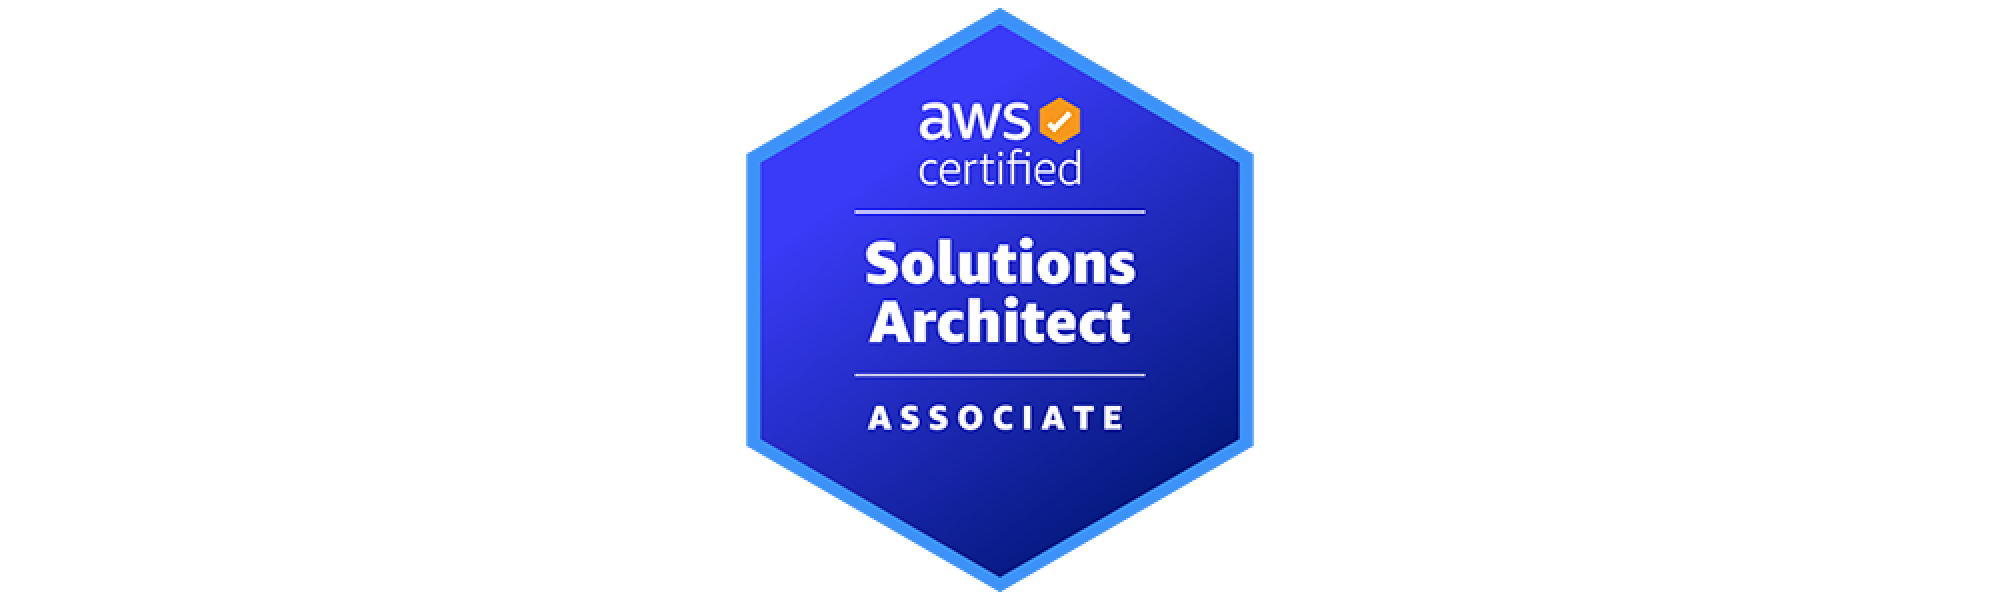 Ultimate AWS Certified Solutions Architect Associate